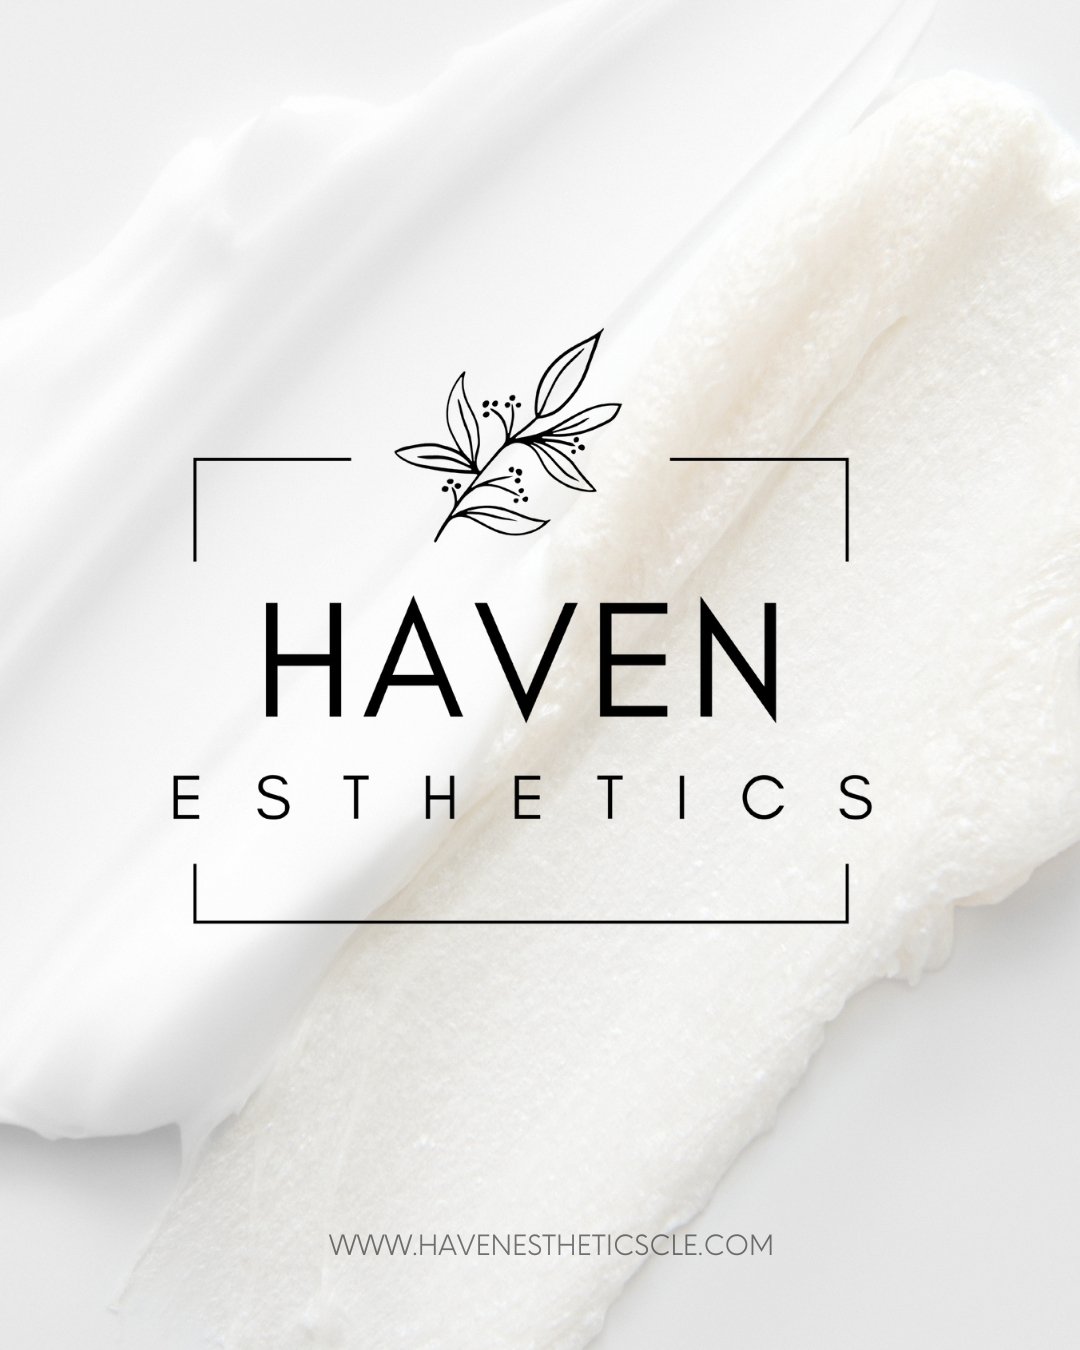 It's official!  After 8 years of working under my own name, Stephanie Walkiewicz Makeup &amp; Skincare is now HAVEN ESTHETICS!

As I said in the email, this is no longer a one woman show and I couldn't be happier to have a name that communicates ever